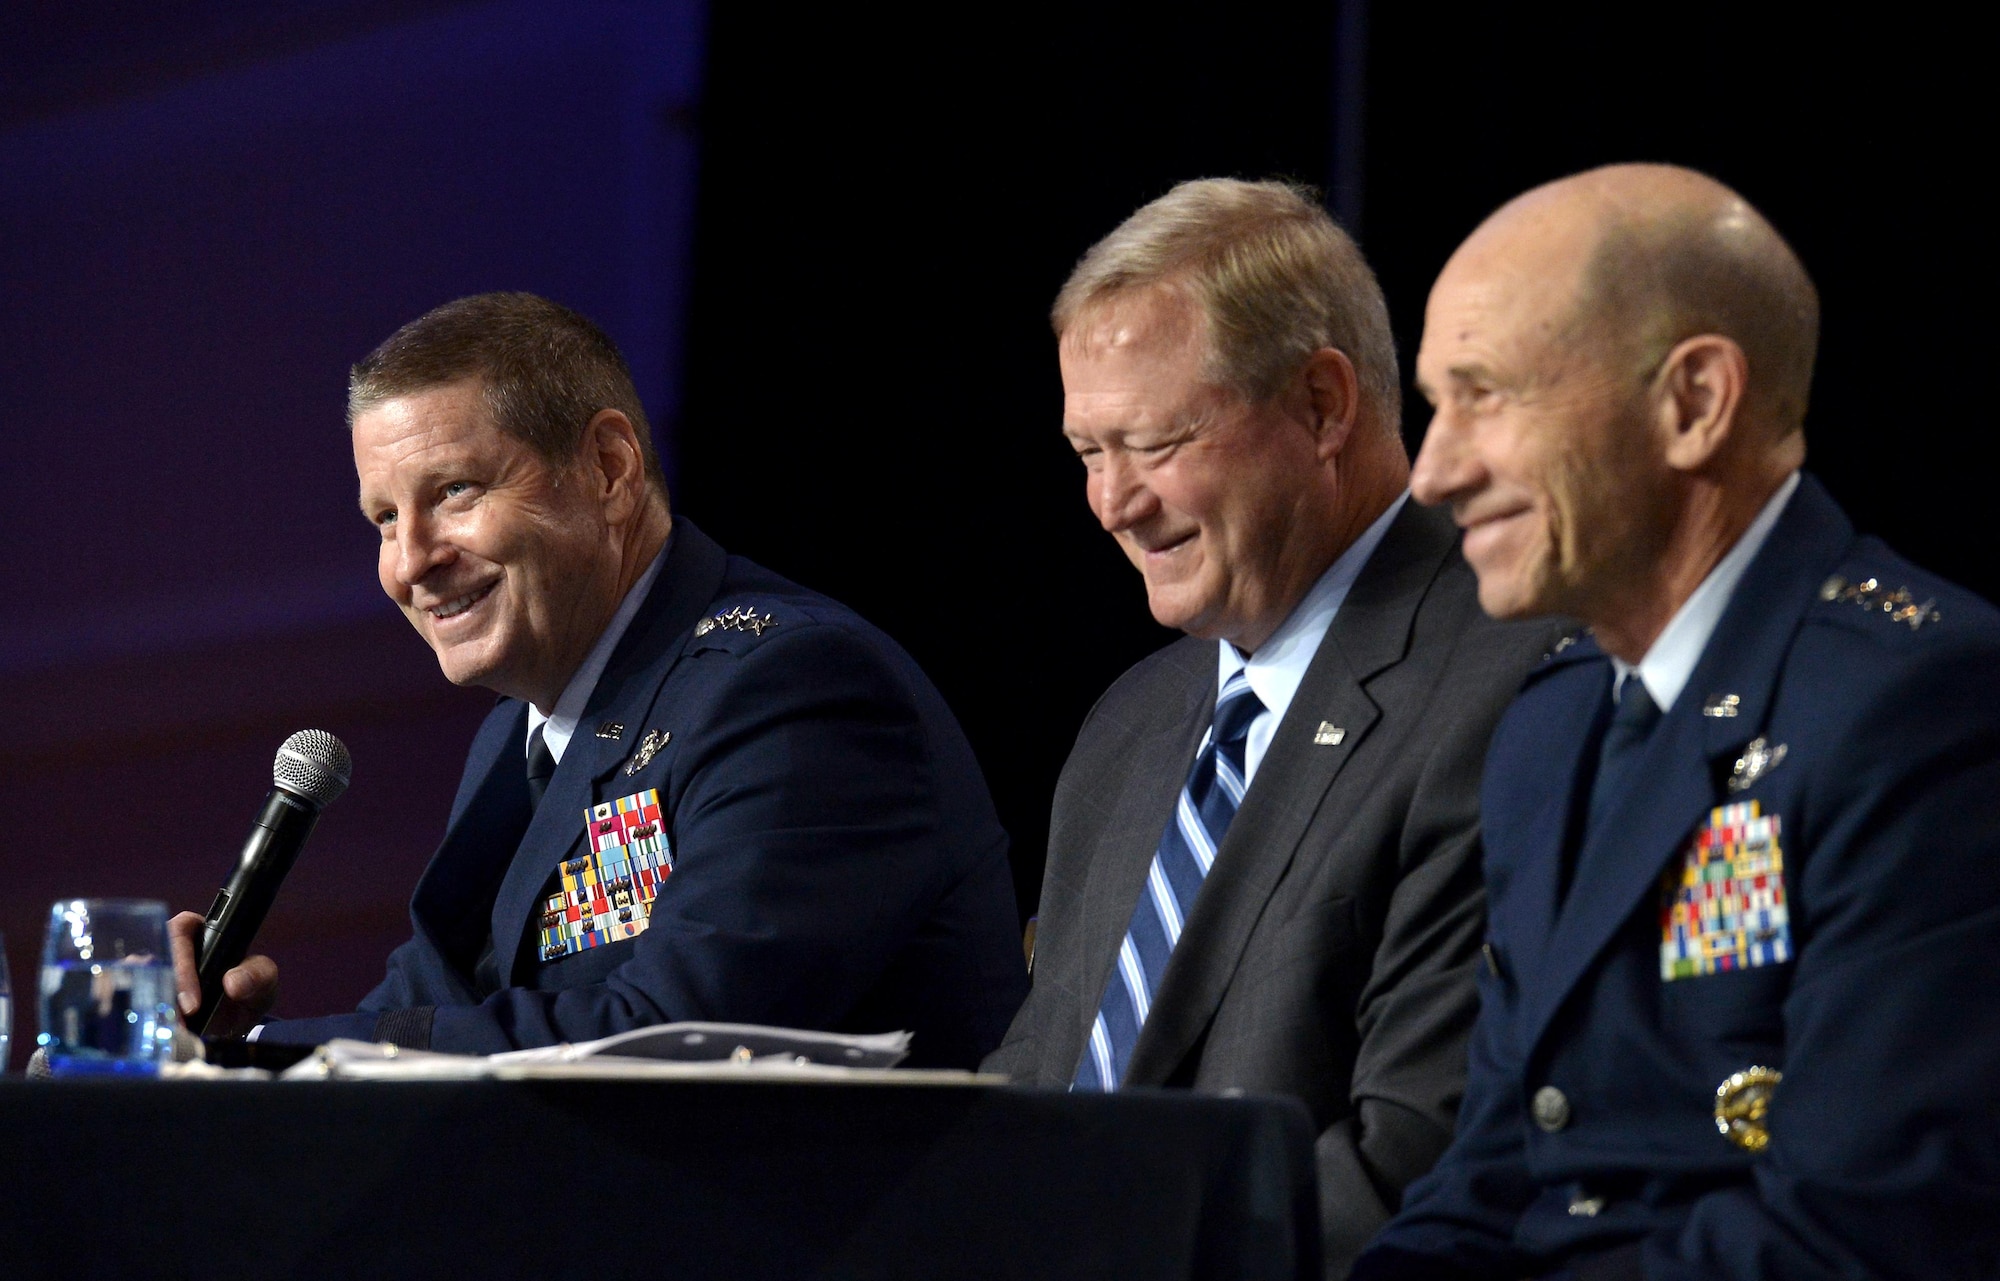 Gen. Robin Rand, the Air Force Global Strike Command commander,  speaks during a B-21 panel at the Air Force Association's Air, Space and Cyber Conference in National Harbor, Md., Sept. 19, 2016. Randall G. Walden, the director and program executive officer of the Air Force Rapid Capabilities Office, and Lt. Gen. James Holmes, the deputy chief of staff, strategic plans and requirements, were also members of the panel. (U.S. Air Force photo/Staff Sgt. Whitney Stanfield)